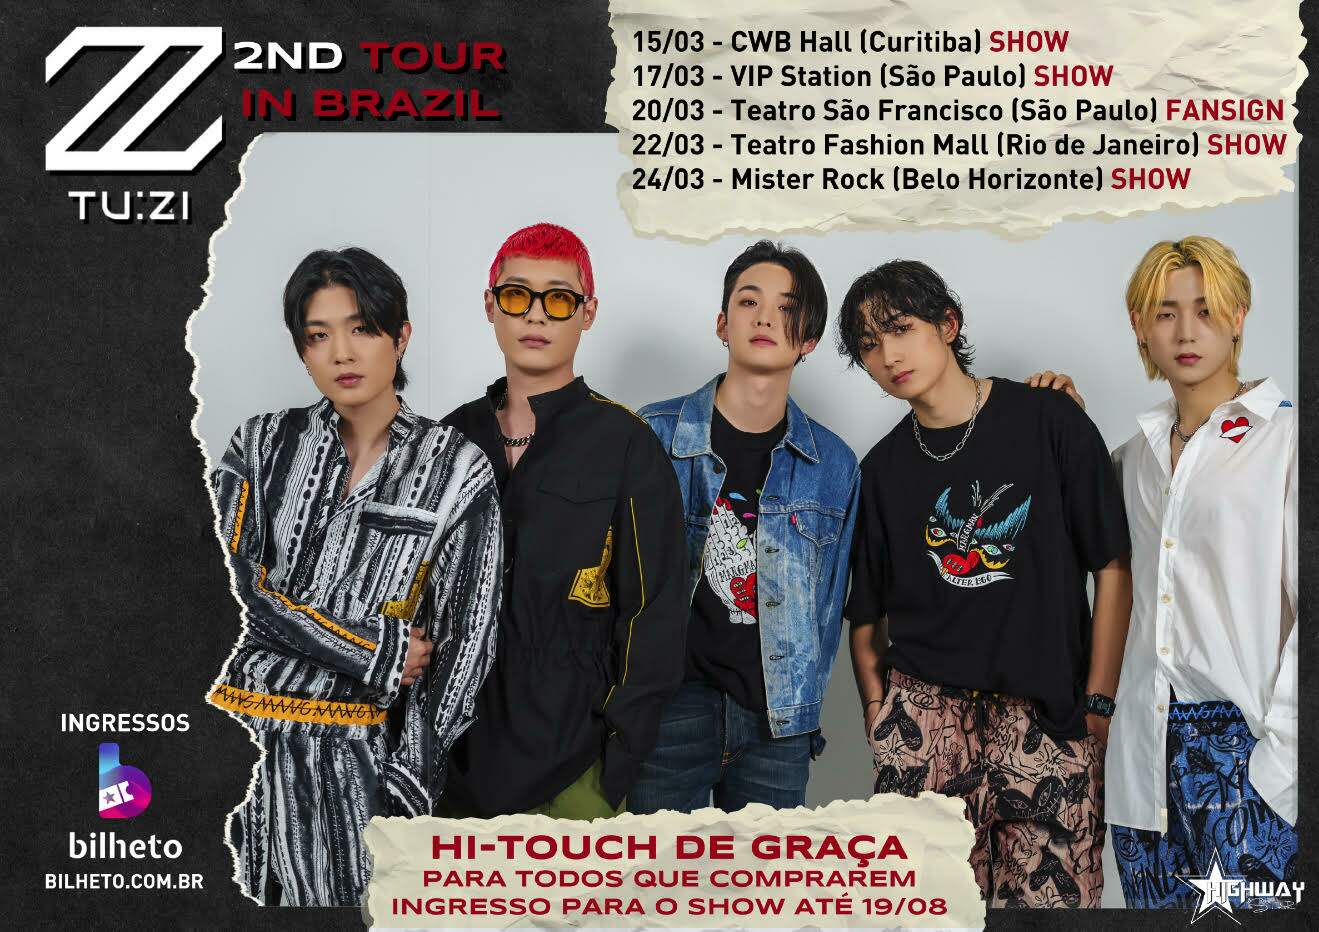 Show: 2Z "2ND Tour in Brazil"